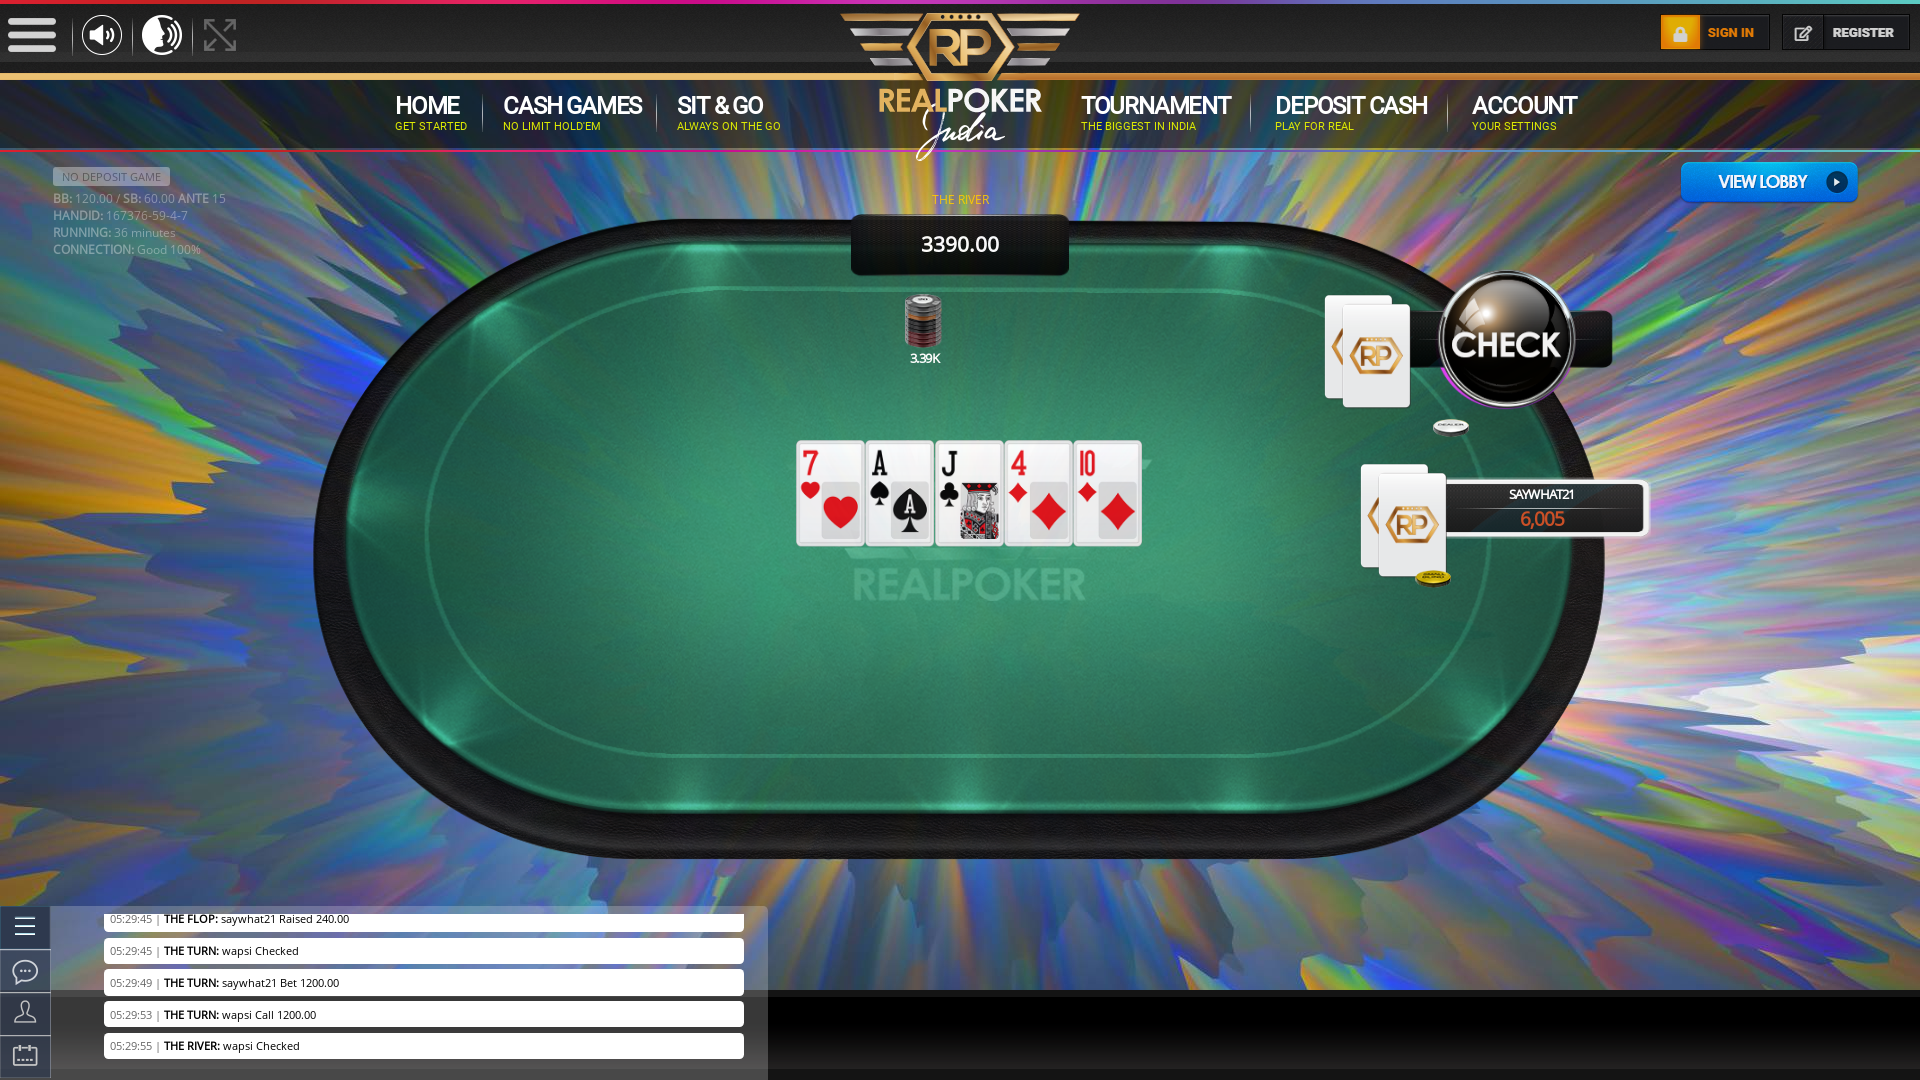 Real Indian poker on a 10 player table in the 36th minute of the game